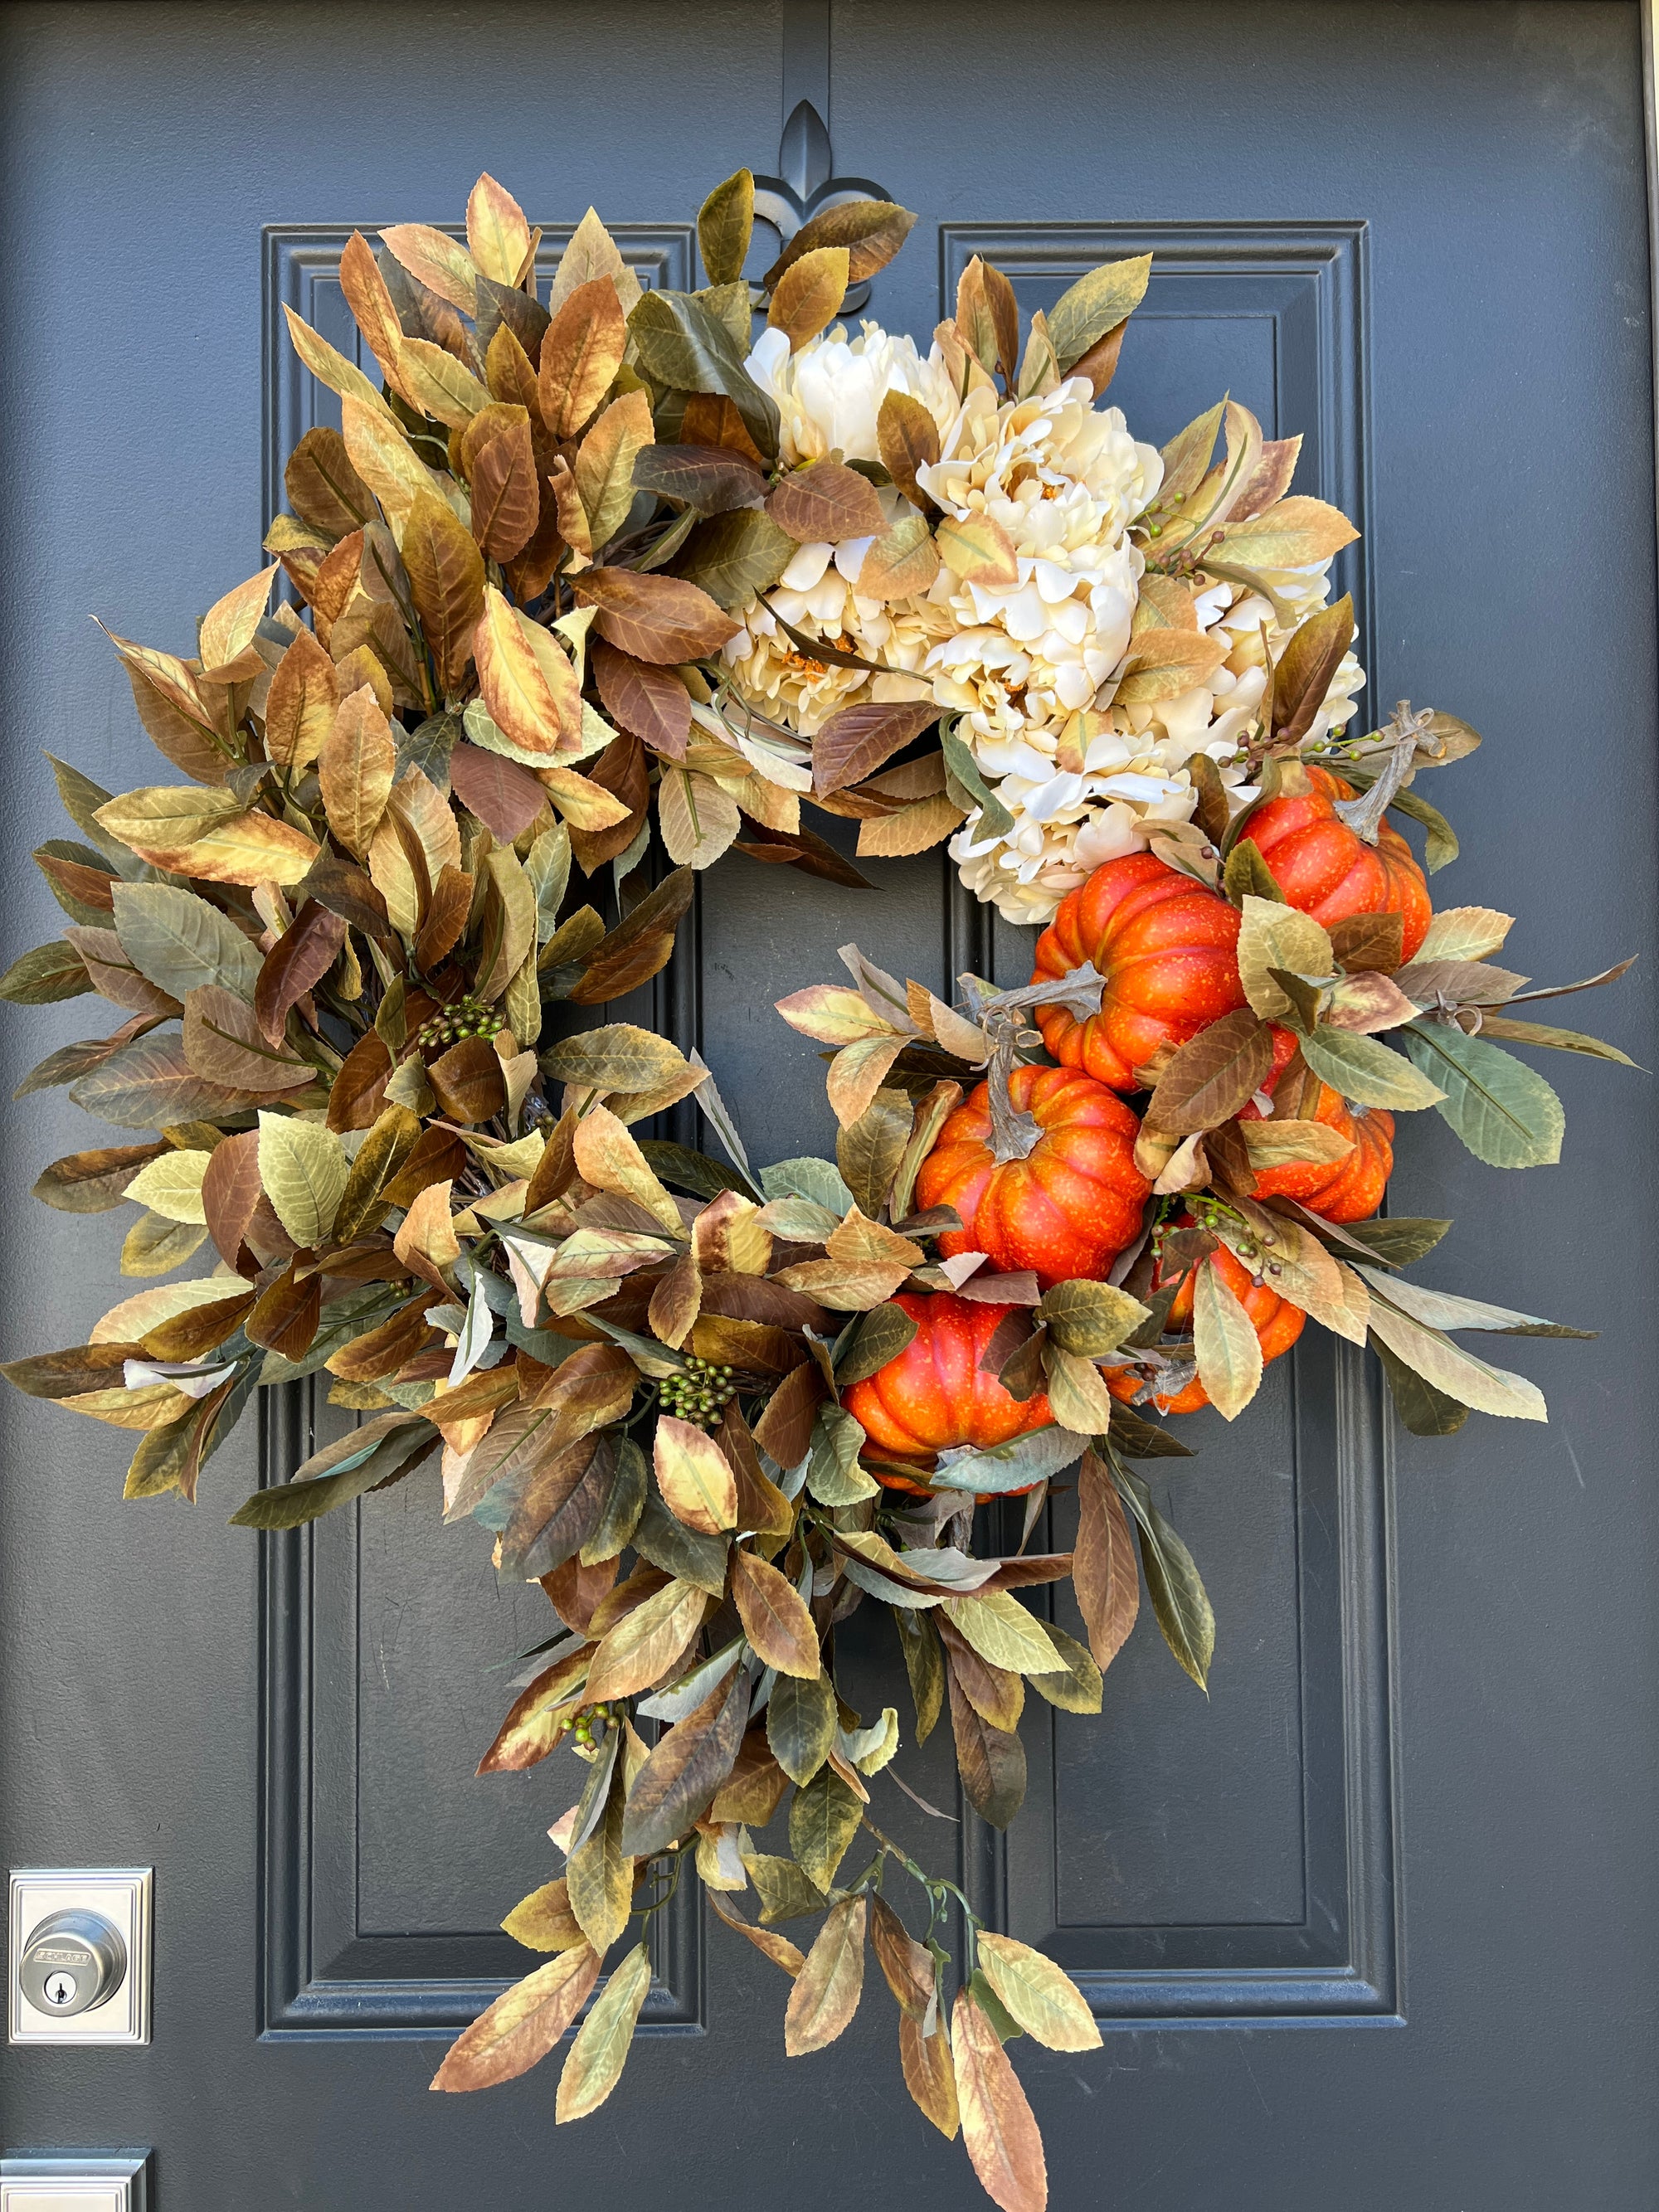 Bountiful Blessings Wreath with Orange Pumpkins and Cream Peonies